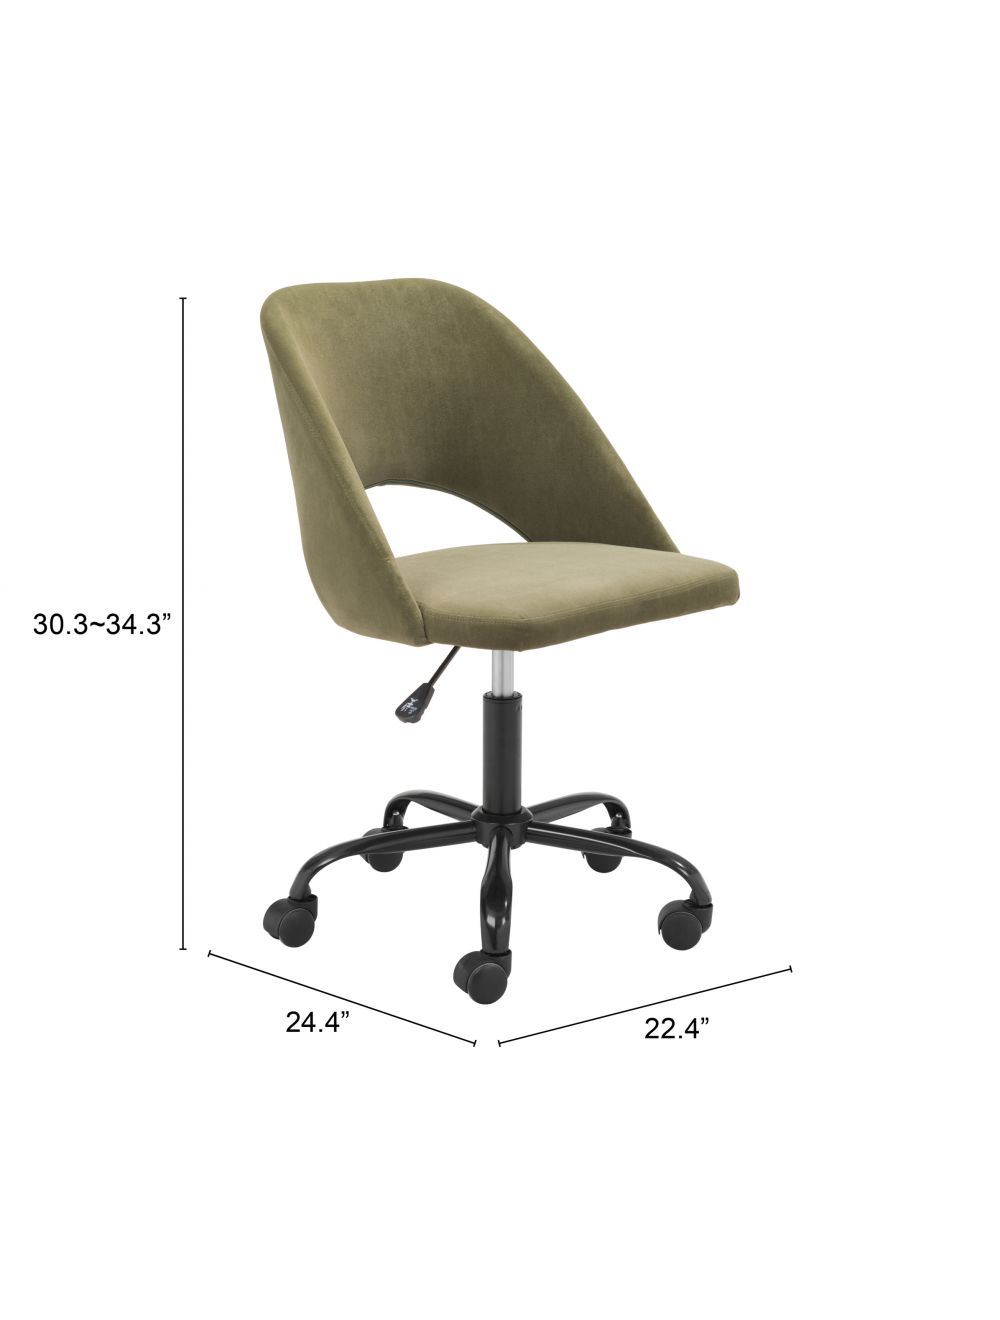 Treibh Office Chair Olive Green